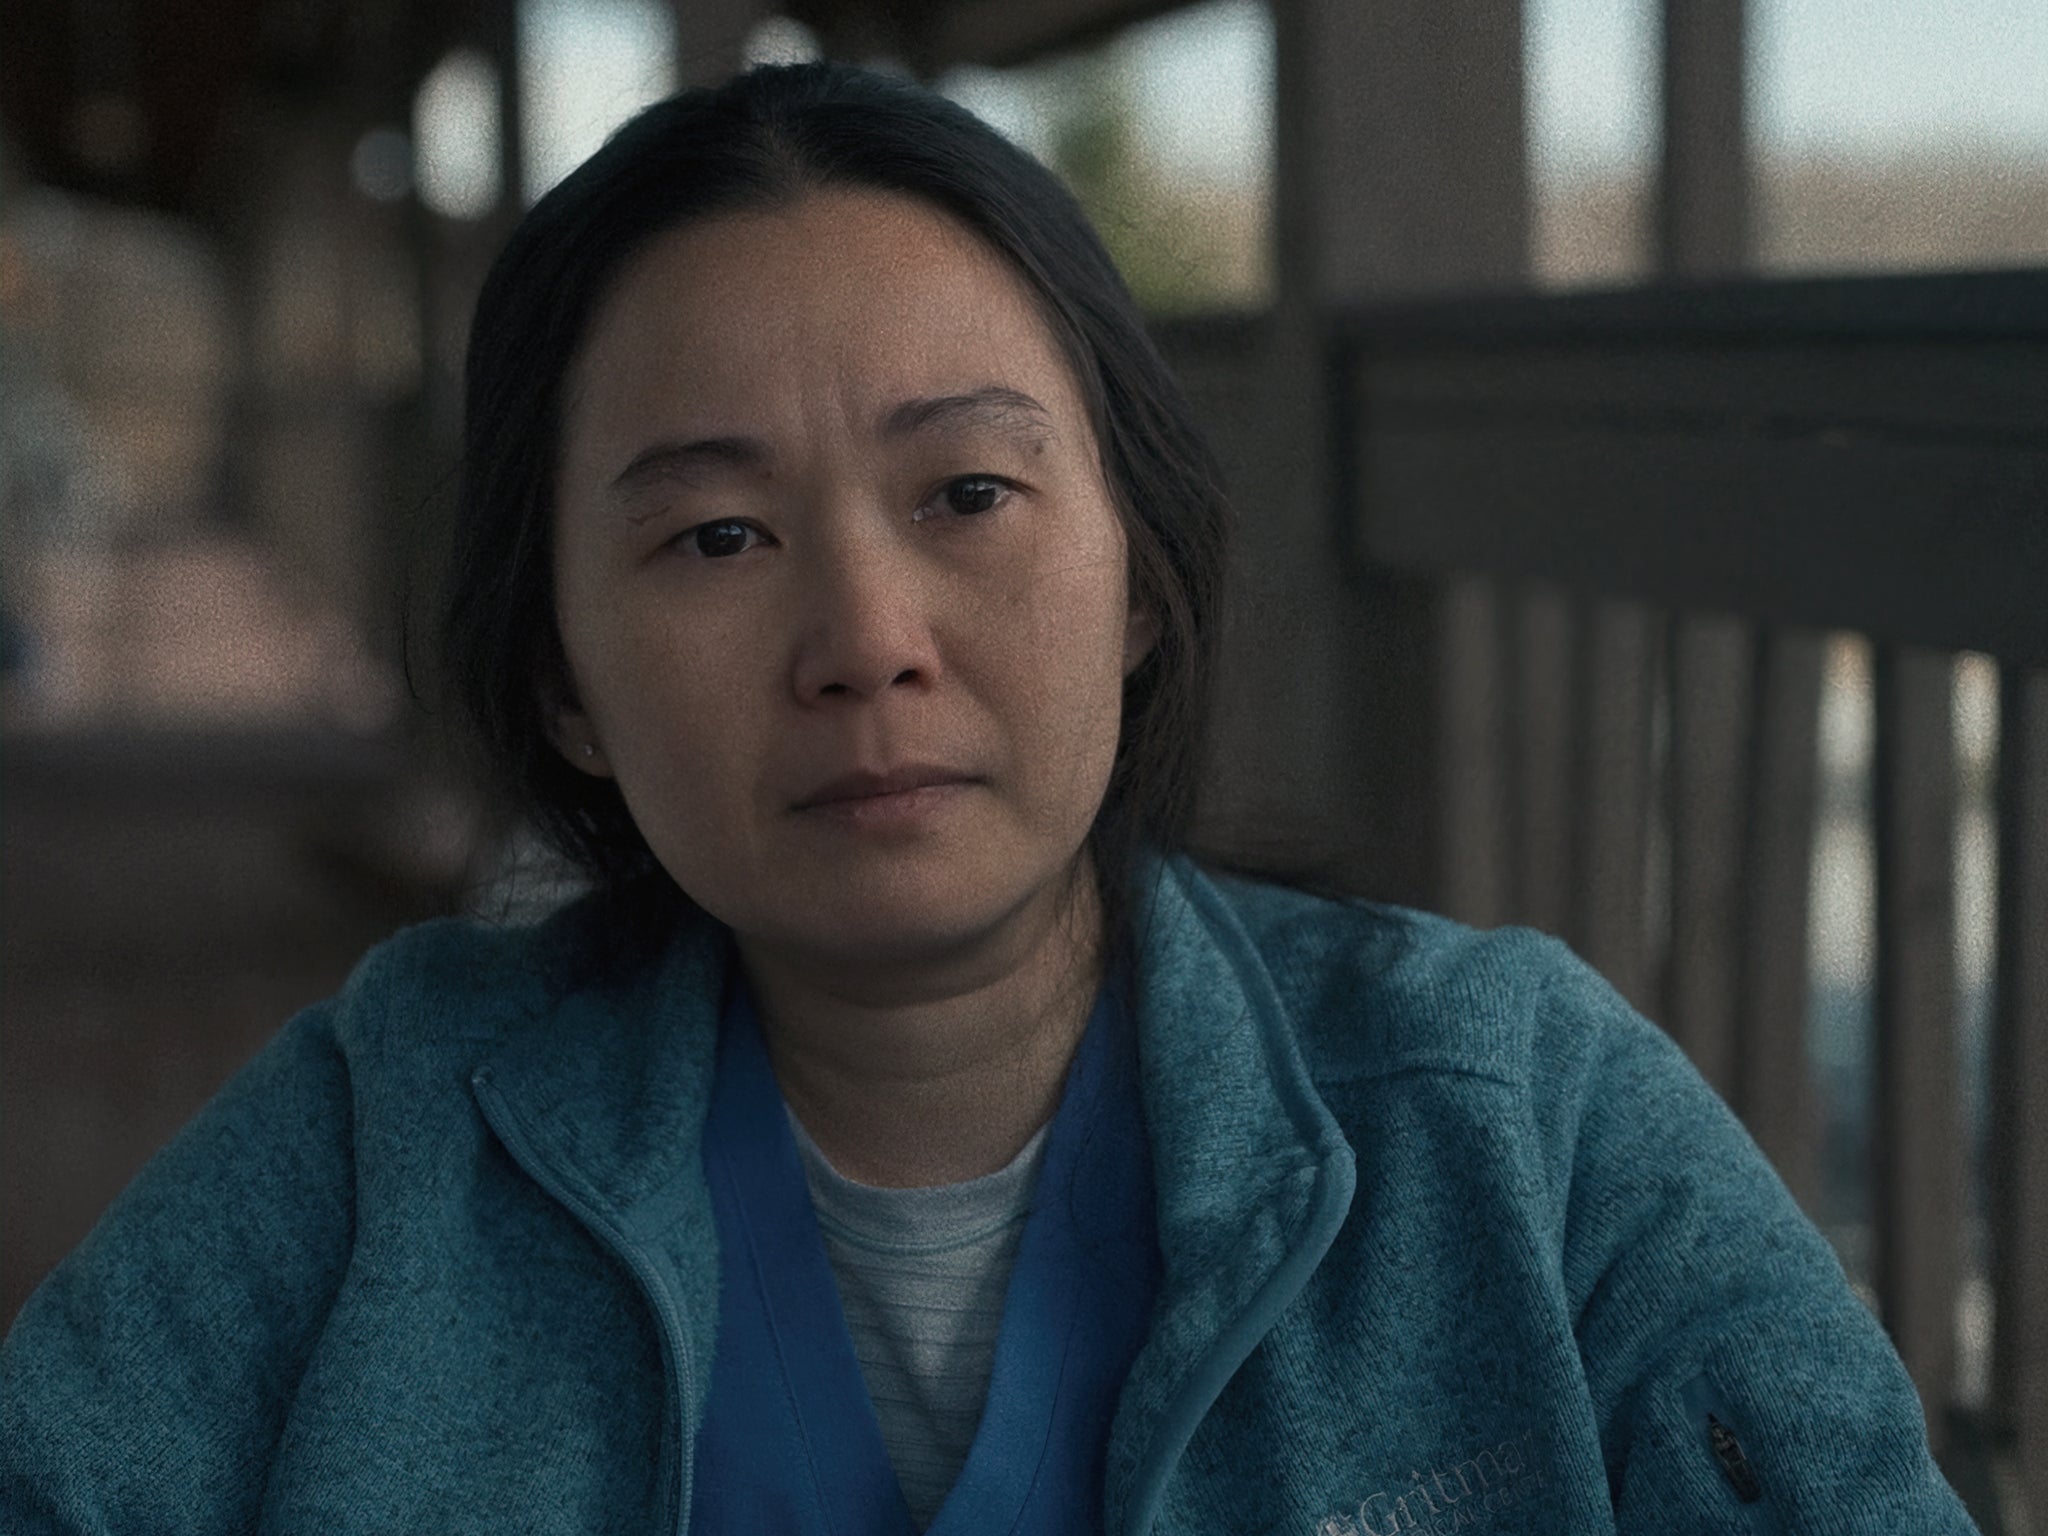 Hong Chau plays a carer in ‘The Whale’